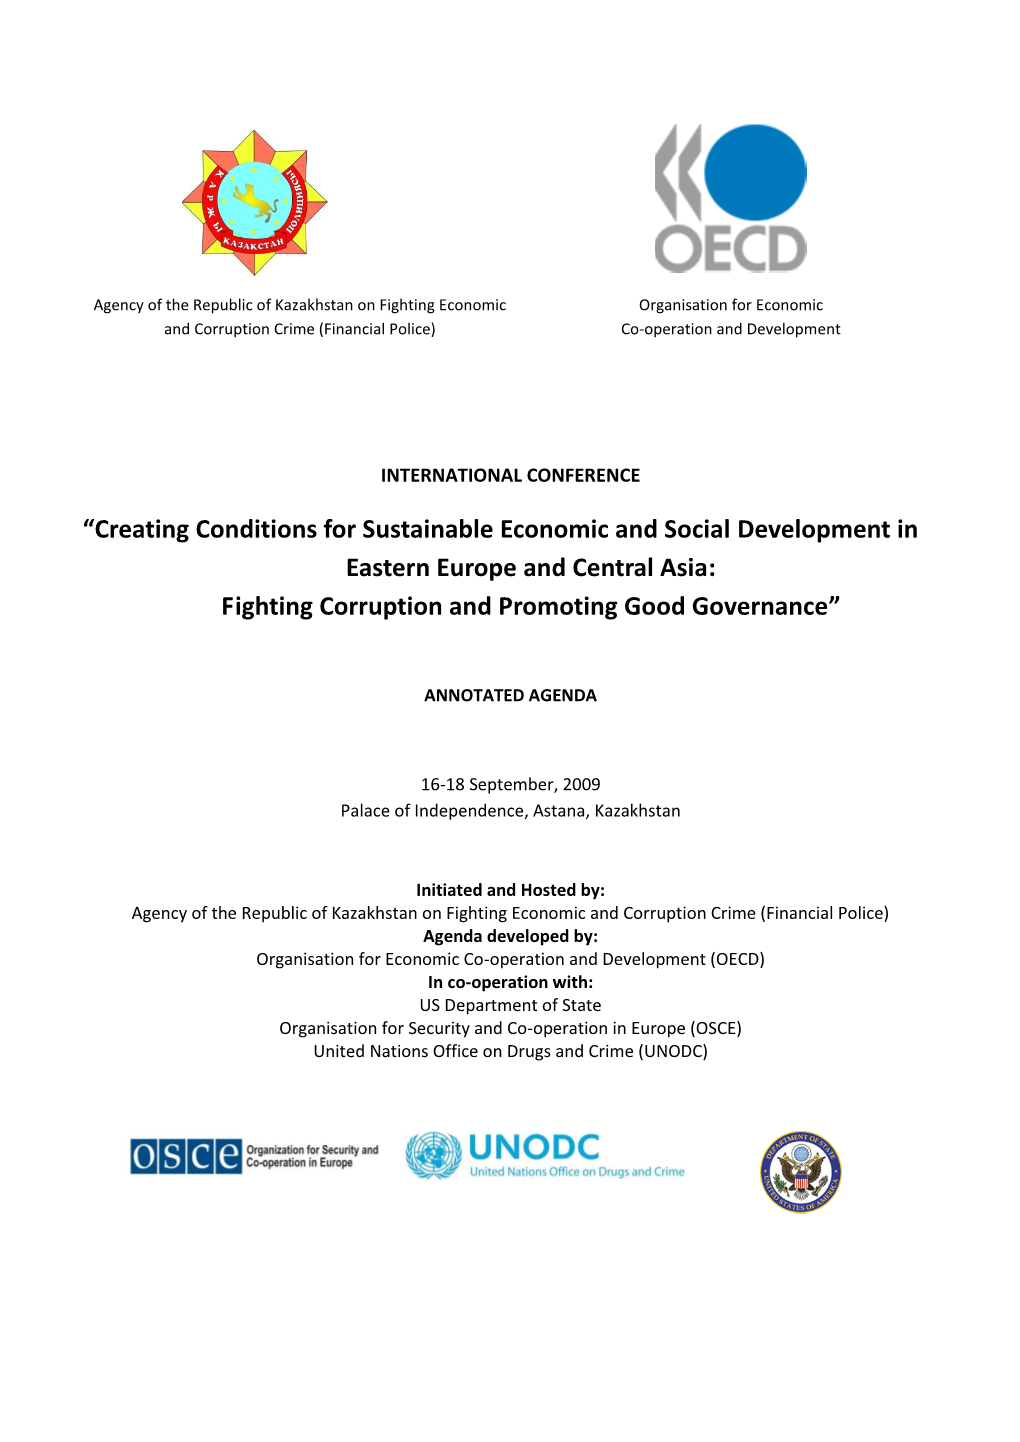 “Creating Conditions for Sustainable Economic and Social Development in Eastern Europe and Central Asia: Fighting Corruption and Promoting Good Governance”